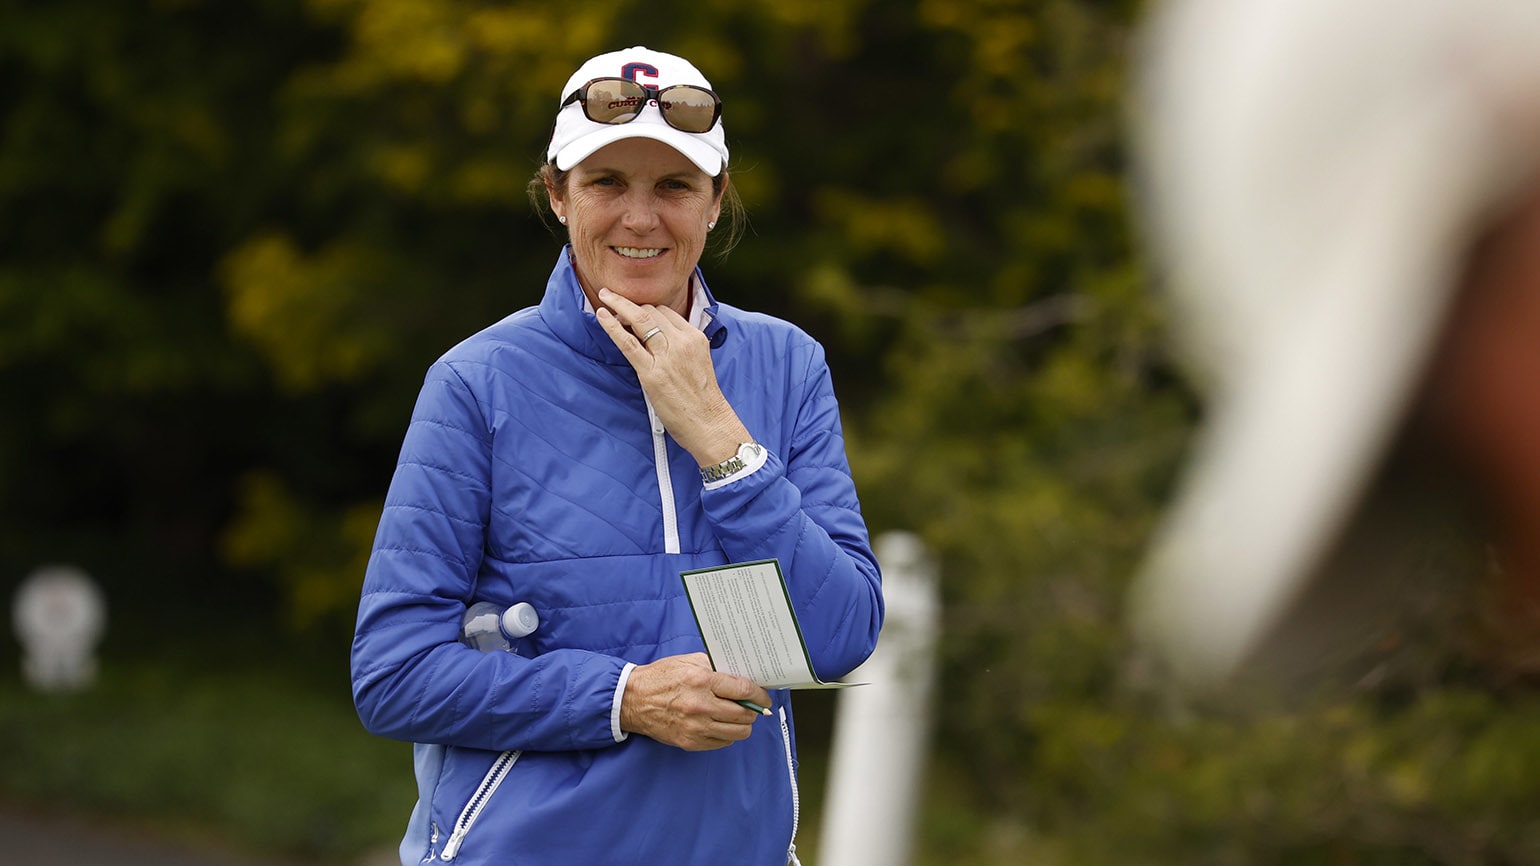 3-time champion Sarah LeBrun Ingram, who guided the USA to a pair of Curtis Cup victories in 2021 and 2022, returns to the Women's Mid-Am for the first time in 27 years. (USGA/Jason E. Miczek)